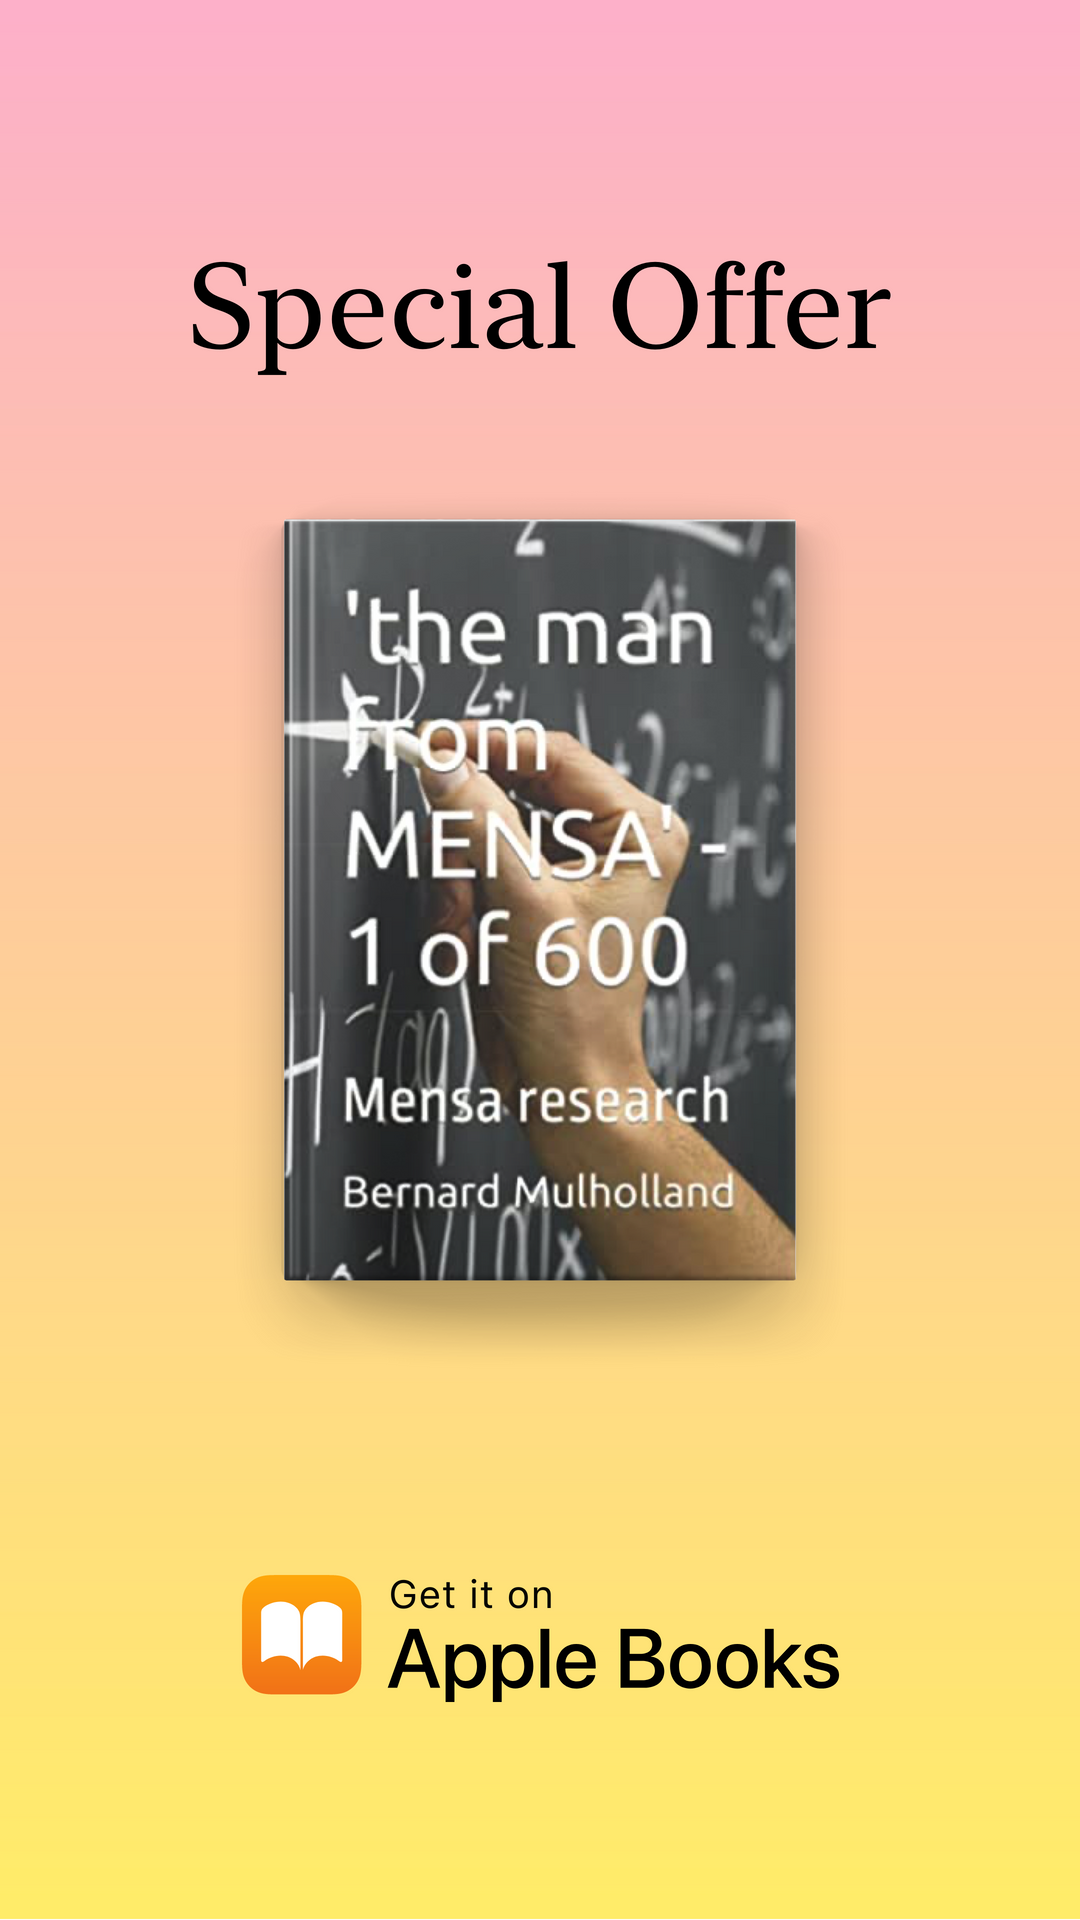 The man from MENSA - 1 of 600: Mensa research